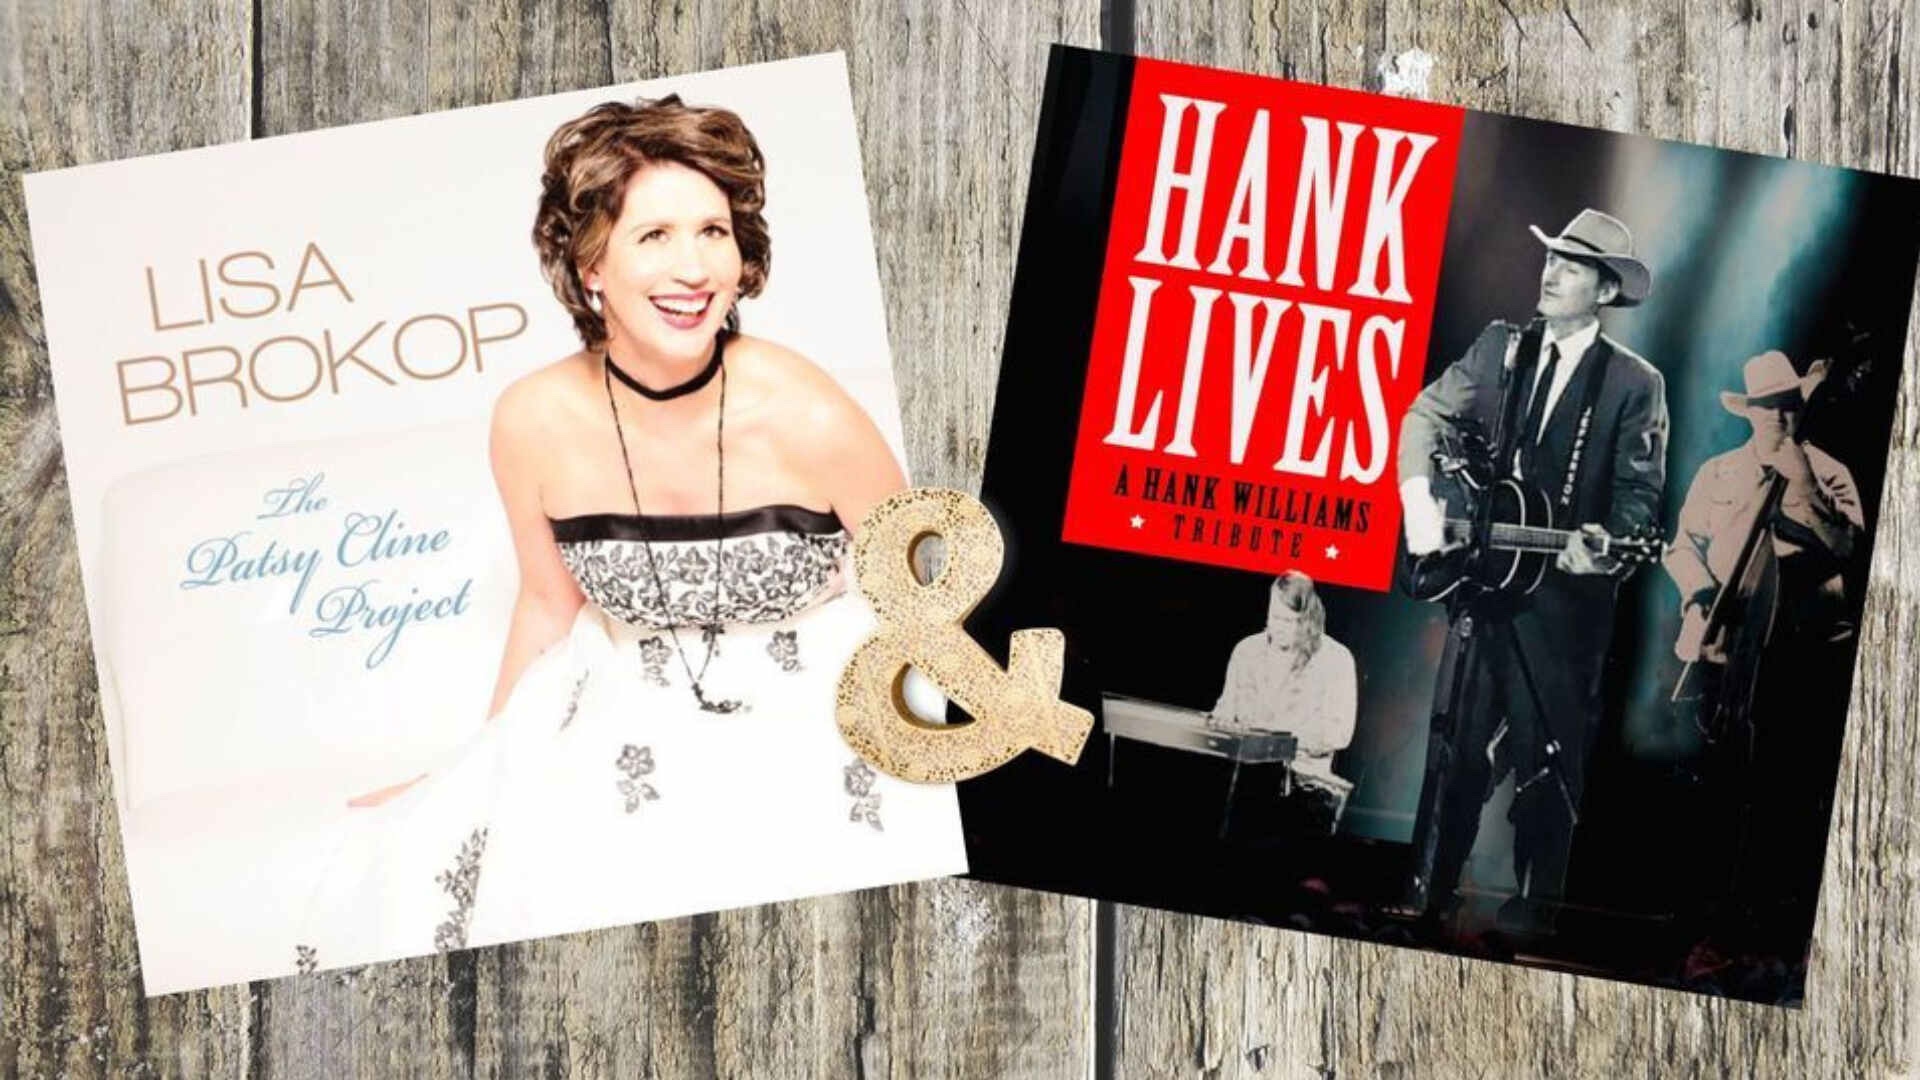 The Patsy Cline Project & Hank Lives at The Franklin Theatre in downtown Franklin.